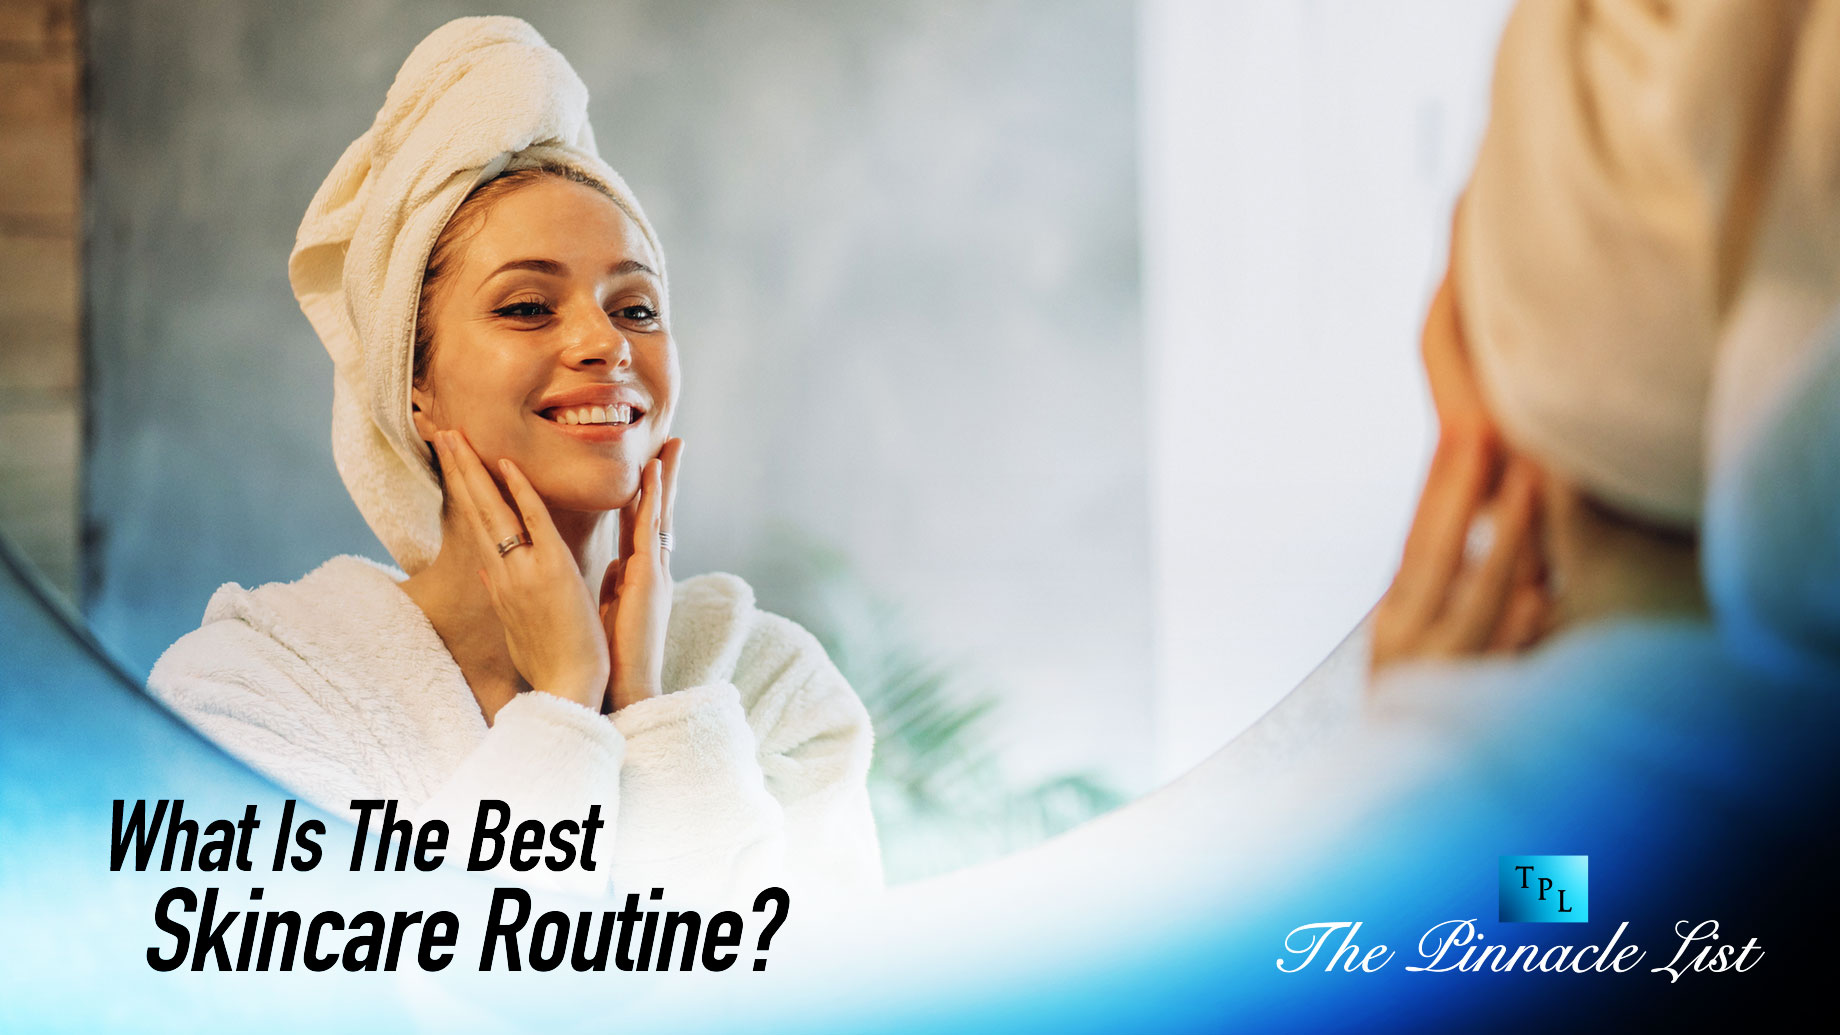 What Is The Best Skincare Routine?